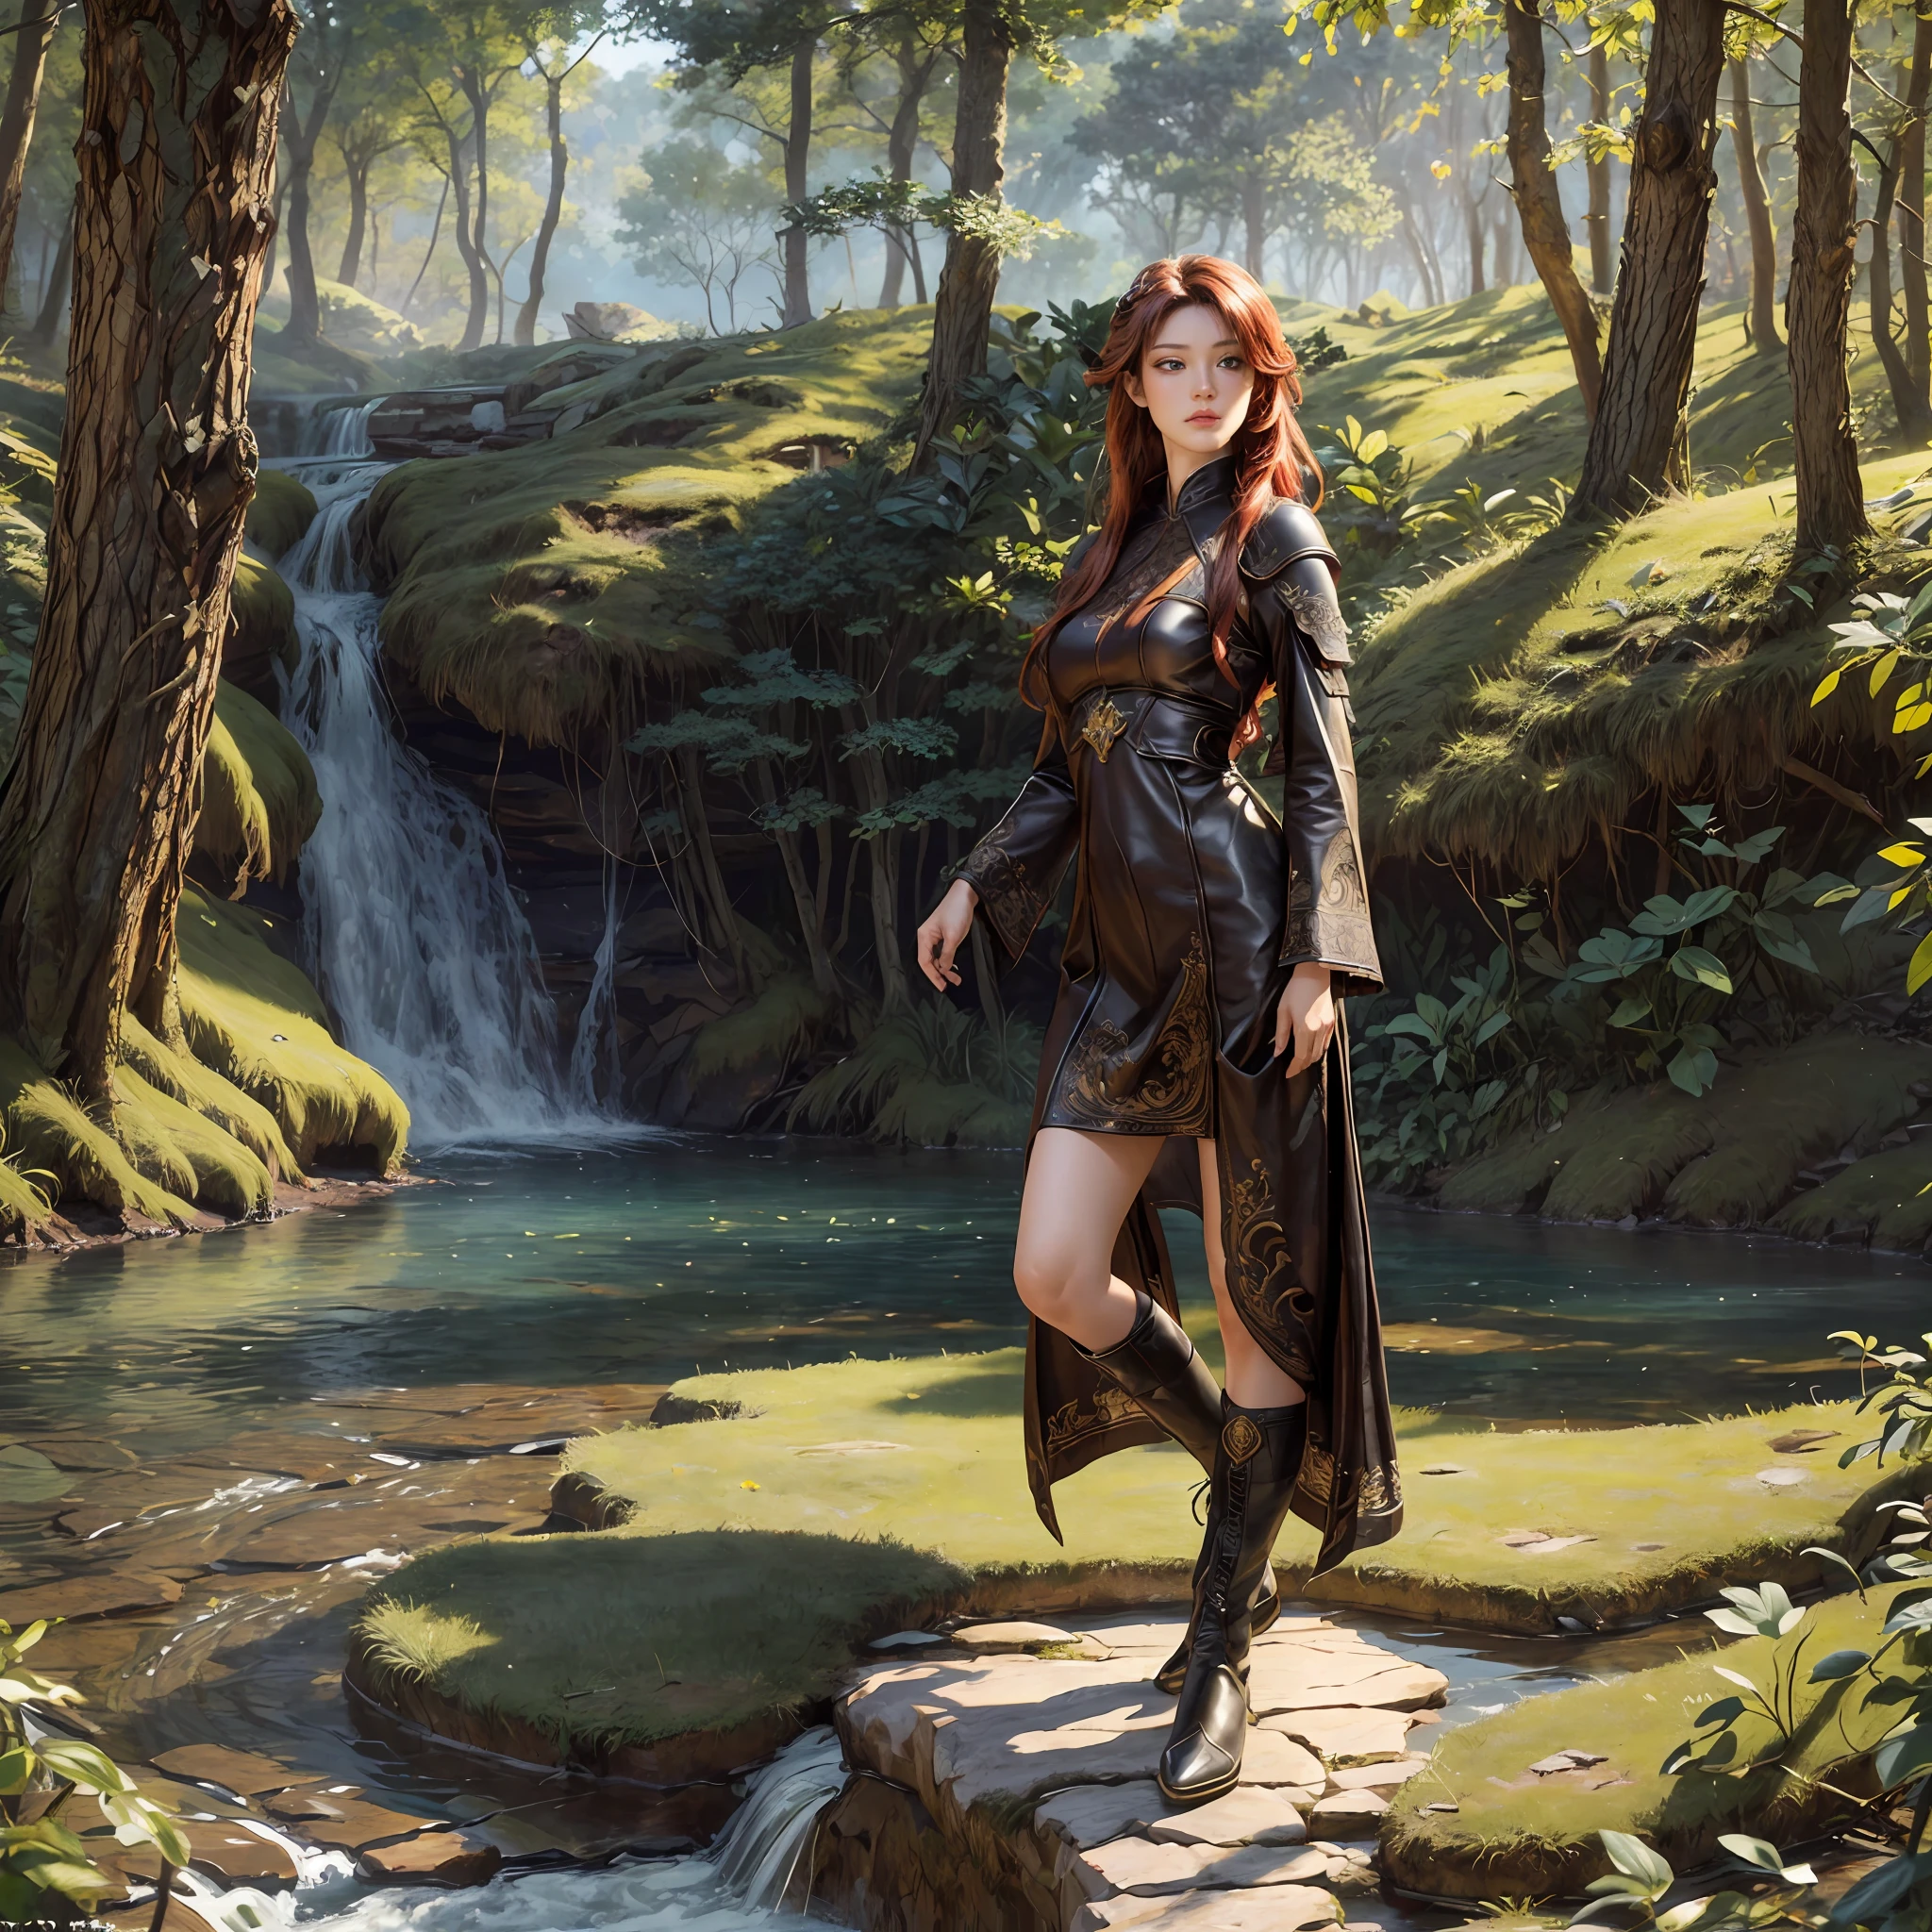 high details, best quality, 8k, [ultra detailed], masterpiece, best quality, (extremely detailed), dynamic angle, ultra wide shot, RAW, photorealistic, fantasy art, dnd art, rpg art, realistic art, a wide angle picture of a female human ranger and a fox 1.4 intricate details, Masterpiece, best quality), warrior of nature, fighter of nature, full body, [[anatomically correct]]. dynamic position (1.5 intricate details, Masterpiece, best quality) talking to a fox (1.6 intricate details, Masterpiece, best quality) in forest (1.5 intricate details, Masterpiece, best quality), a female  wearing leather clothes (1.4 intricate details, Masterpiece, best quality), leather boots, thick hair, long hair, red hair, fair skin intense eyes, forest  background (intense details), a stream flowing in the background (1.4 intricate details, Masterpiece, best quality), dawn light, clouds (1.4 intricate details, Masterpiece, best quality), dynamic angle, (1.4 intricate details, Masterpiece, best quality) 3D rendering, high details, best quality, highres, ultra wide angle